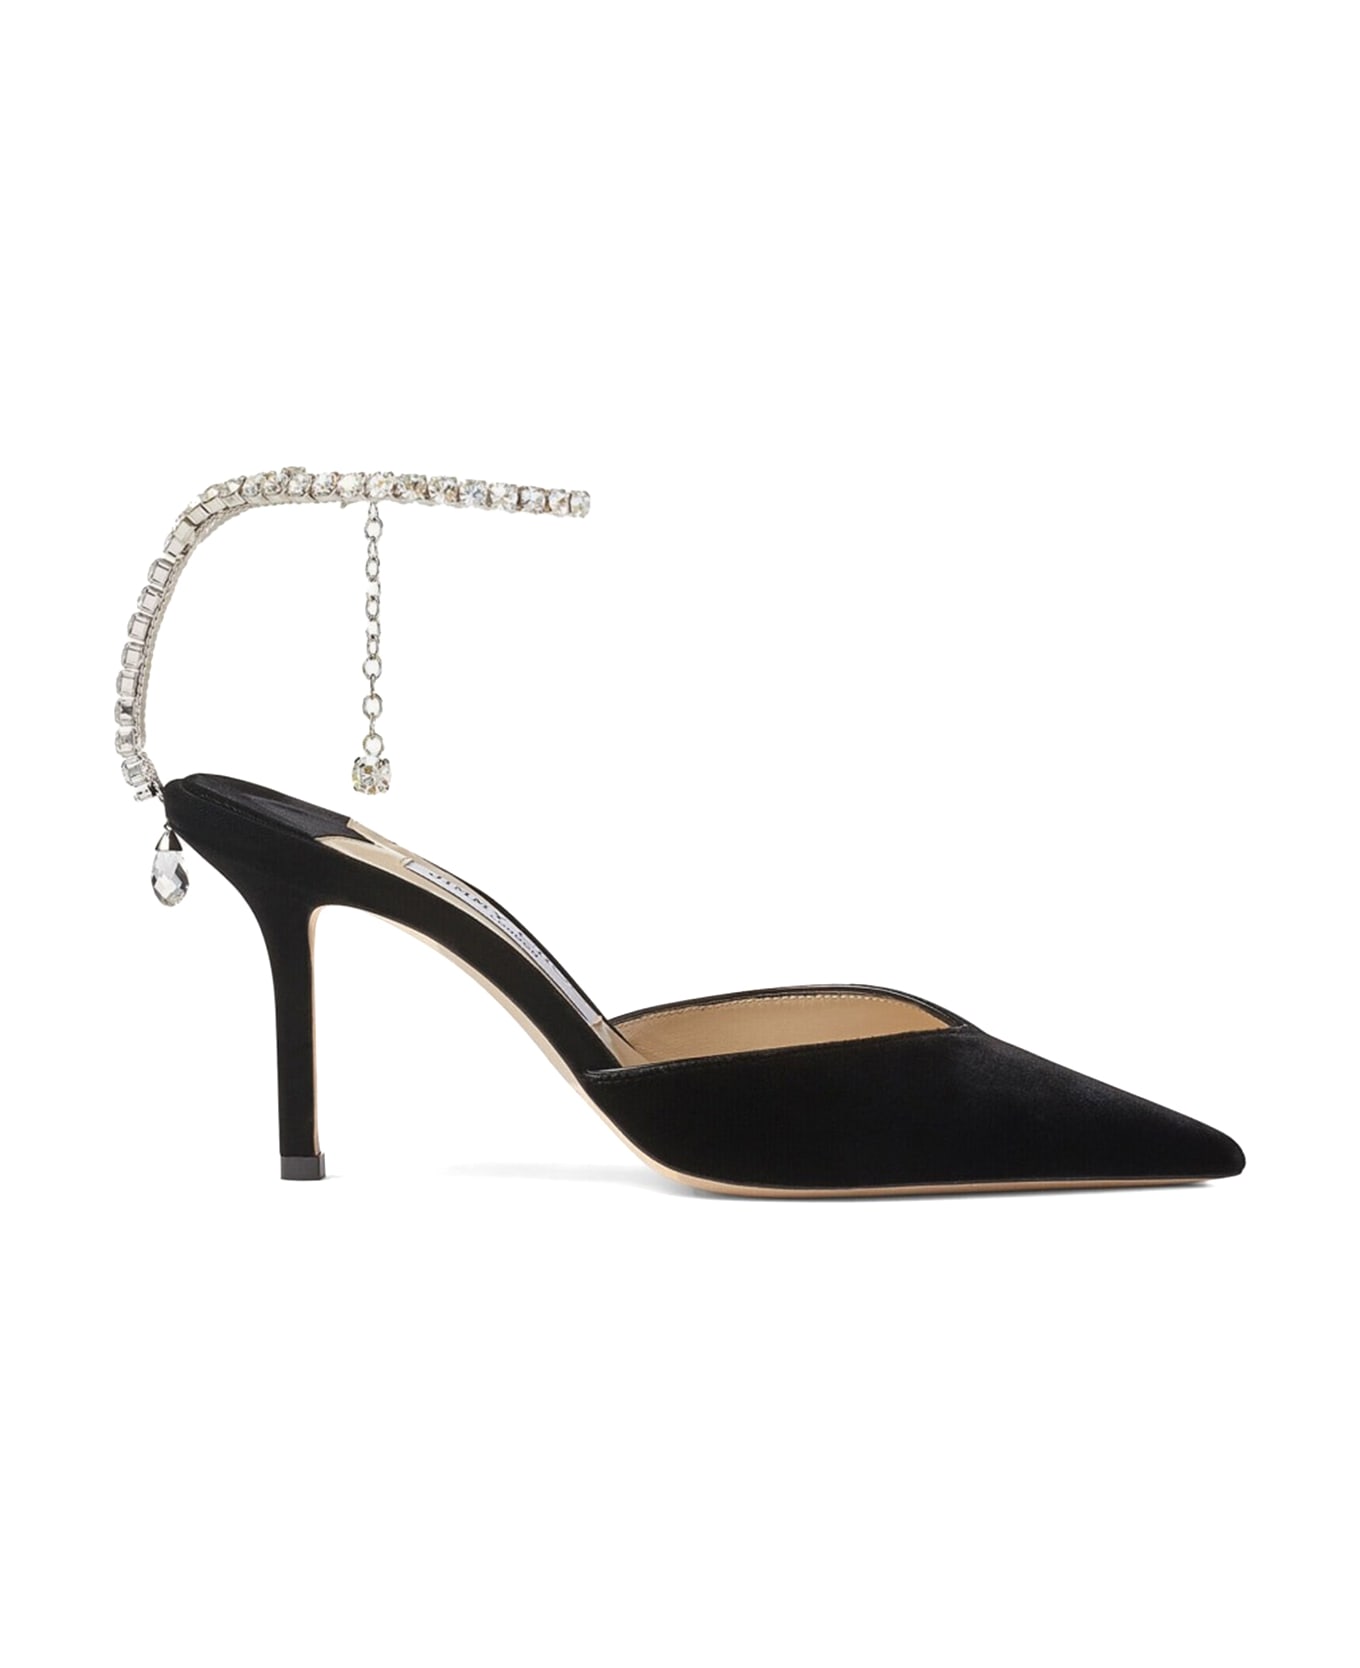 Jimmy Choo Black Patent Leather Pumps With Crystals - BLACK CRYSTAL